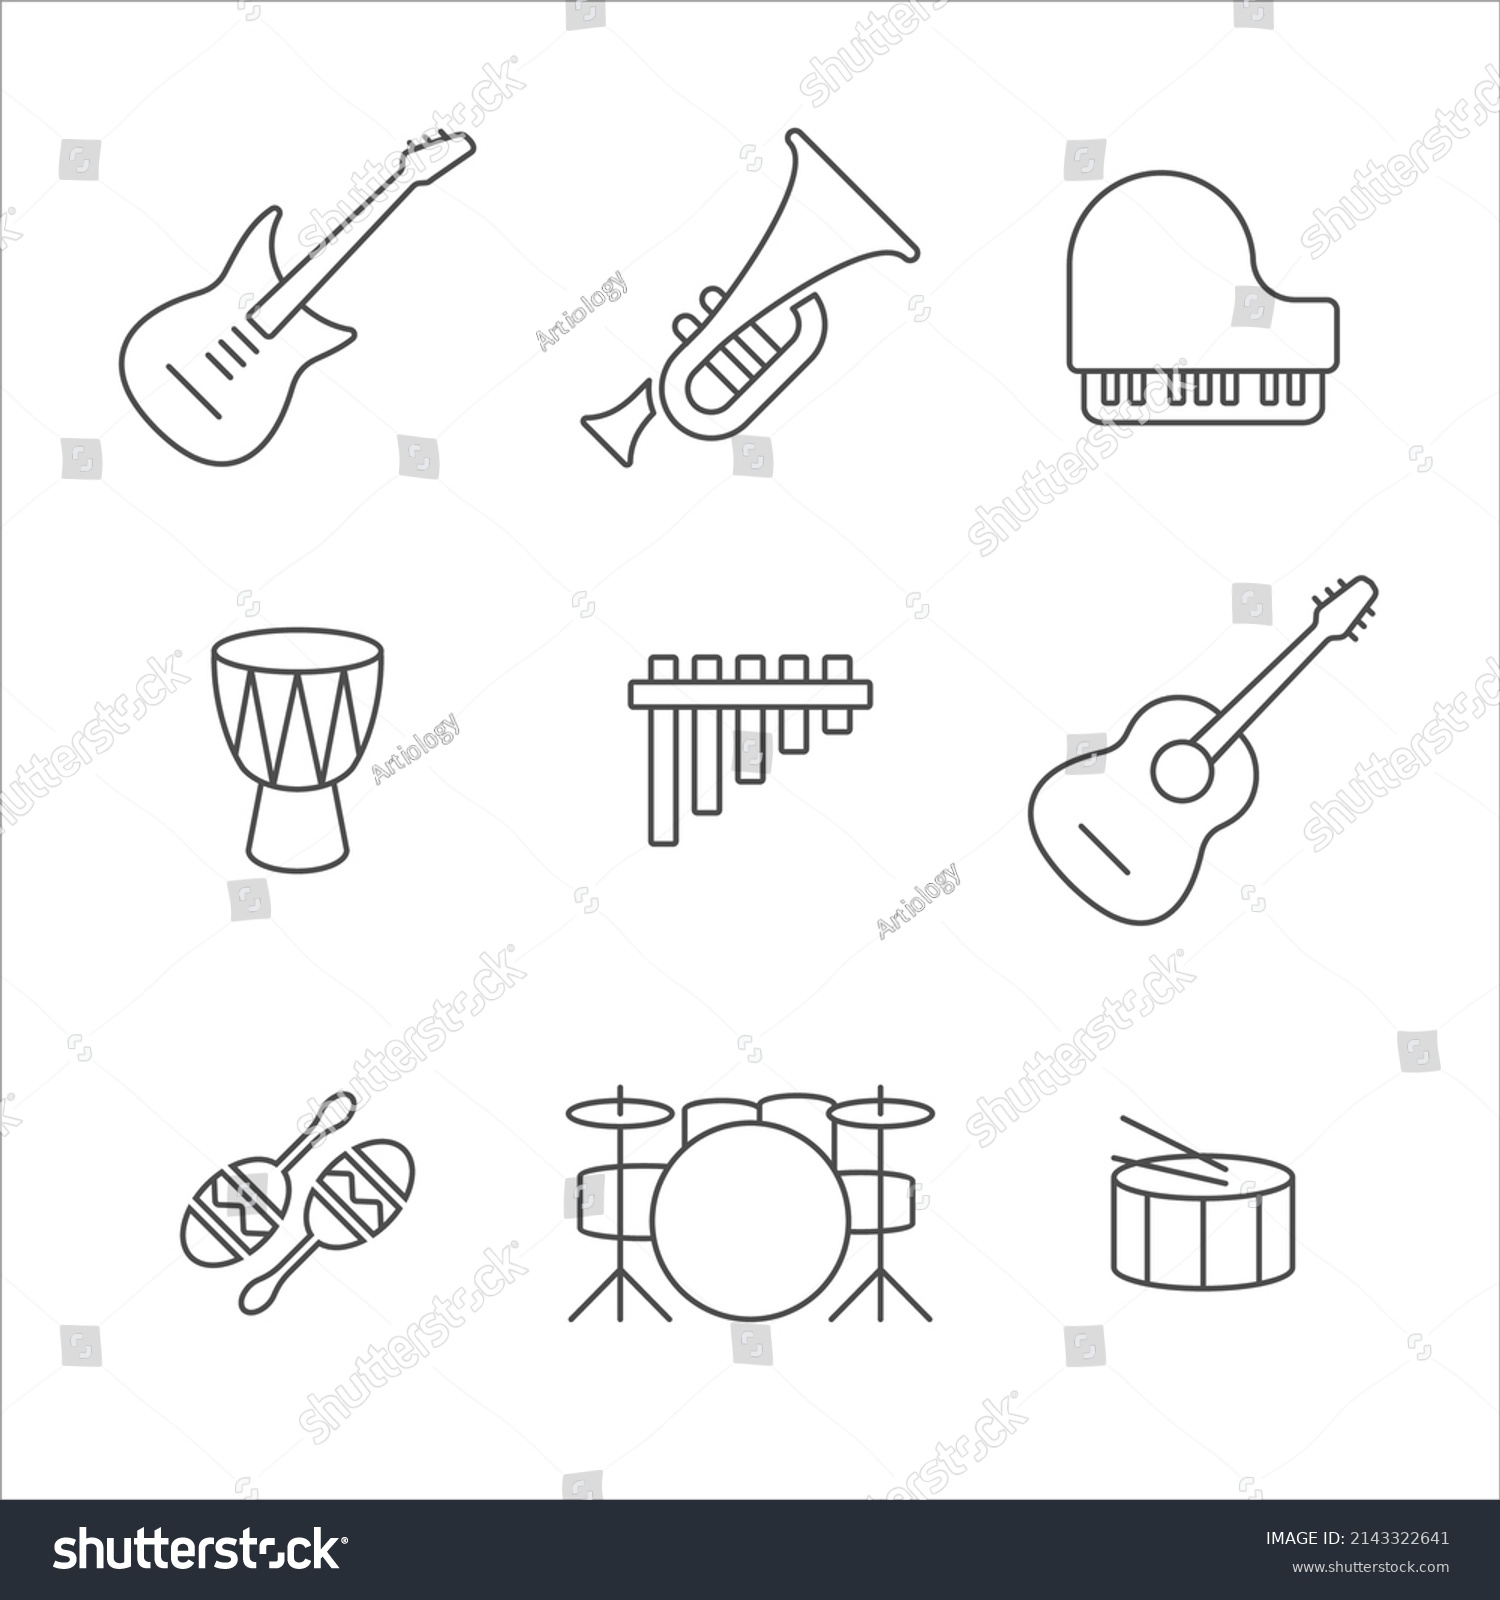 Simple Icons Various Musical Instruments Stock Vector (Royalty Free ...